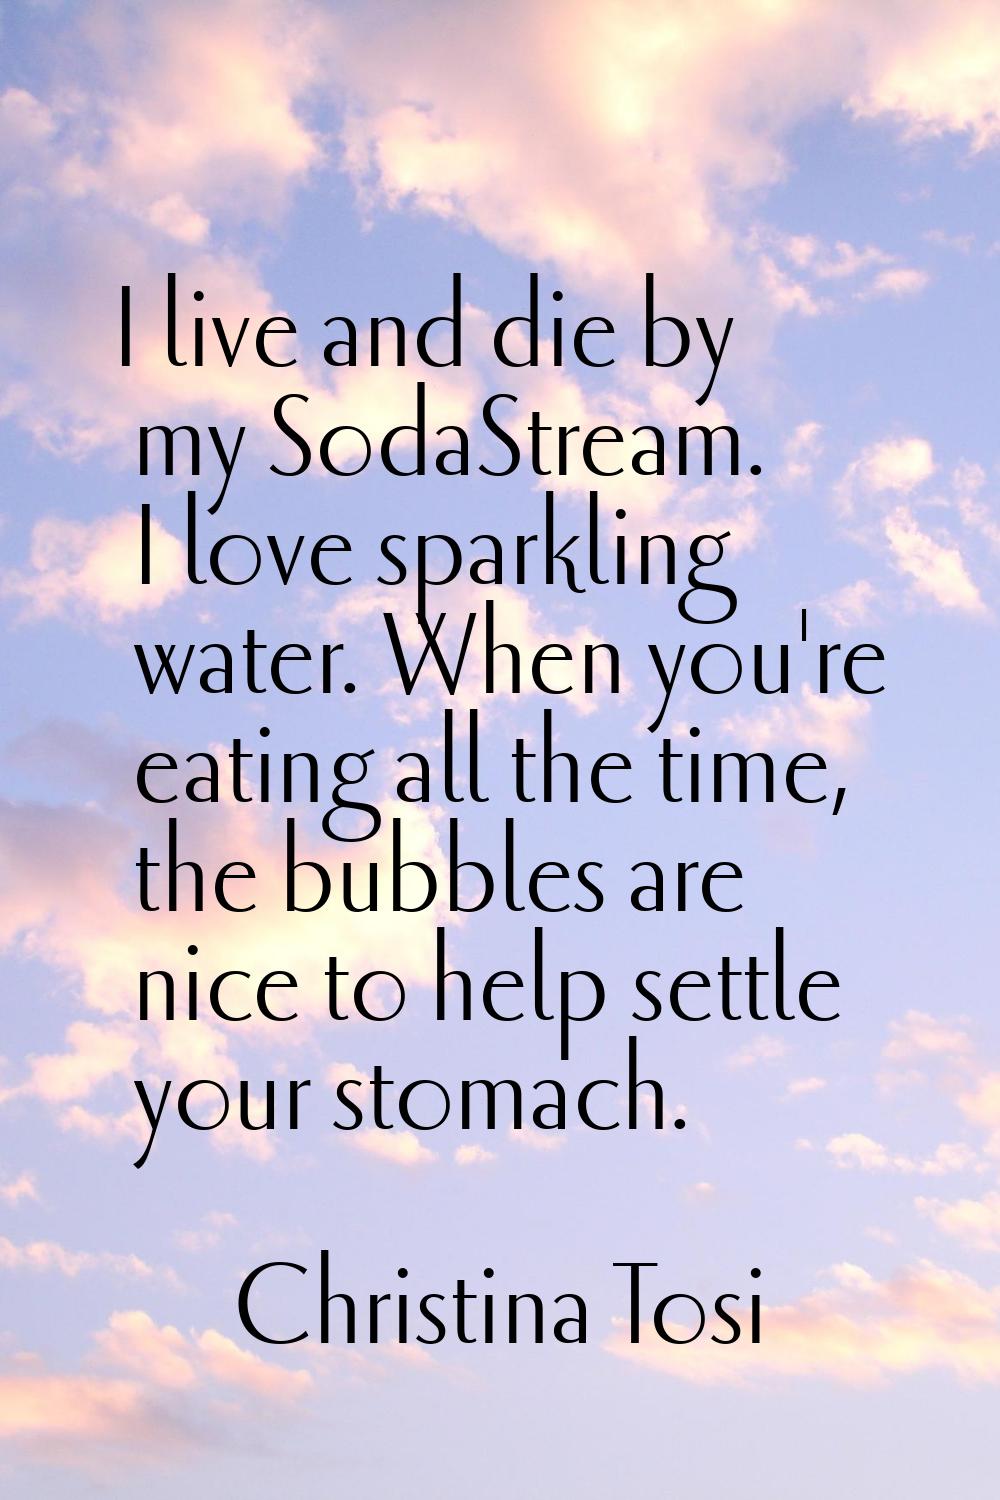 I live and die by my SodaStream. I love sparkling water. When you're eating all the time, the bubbl